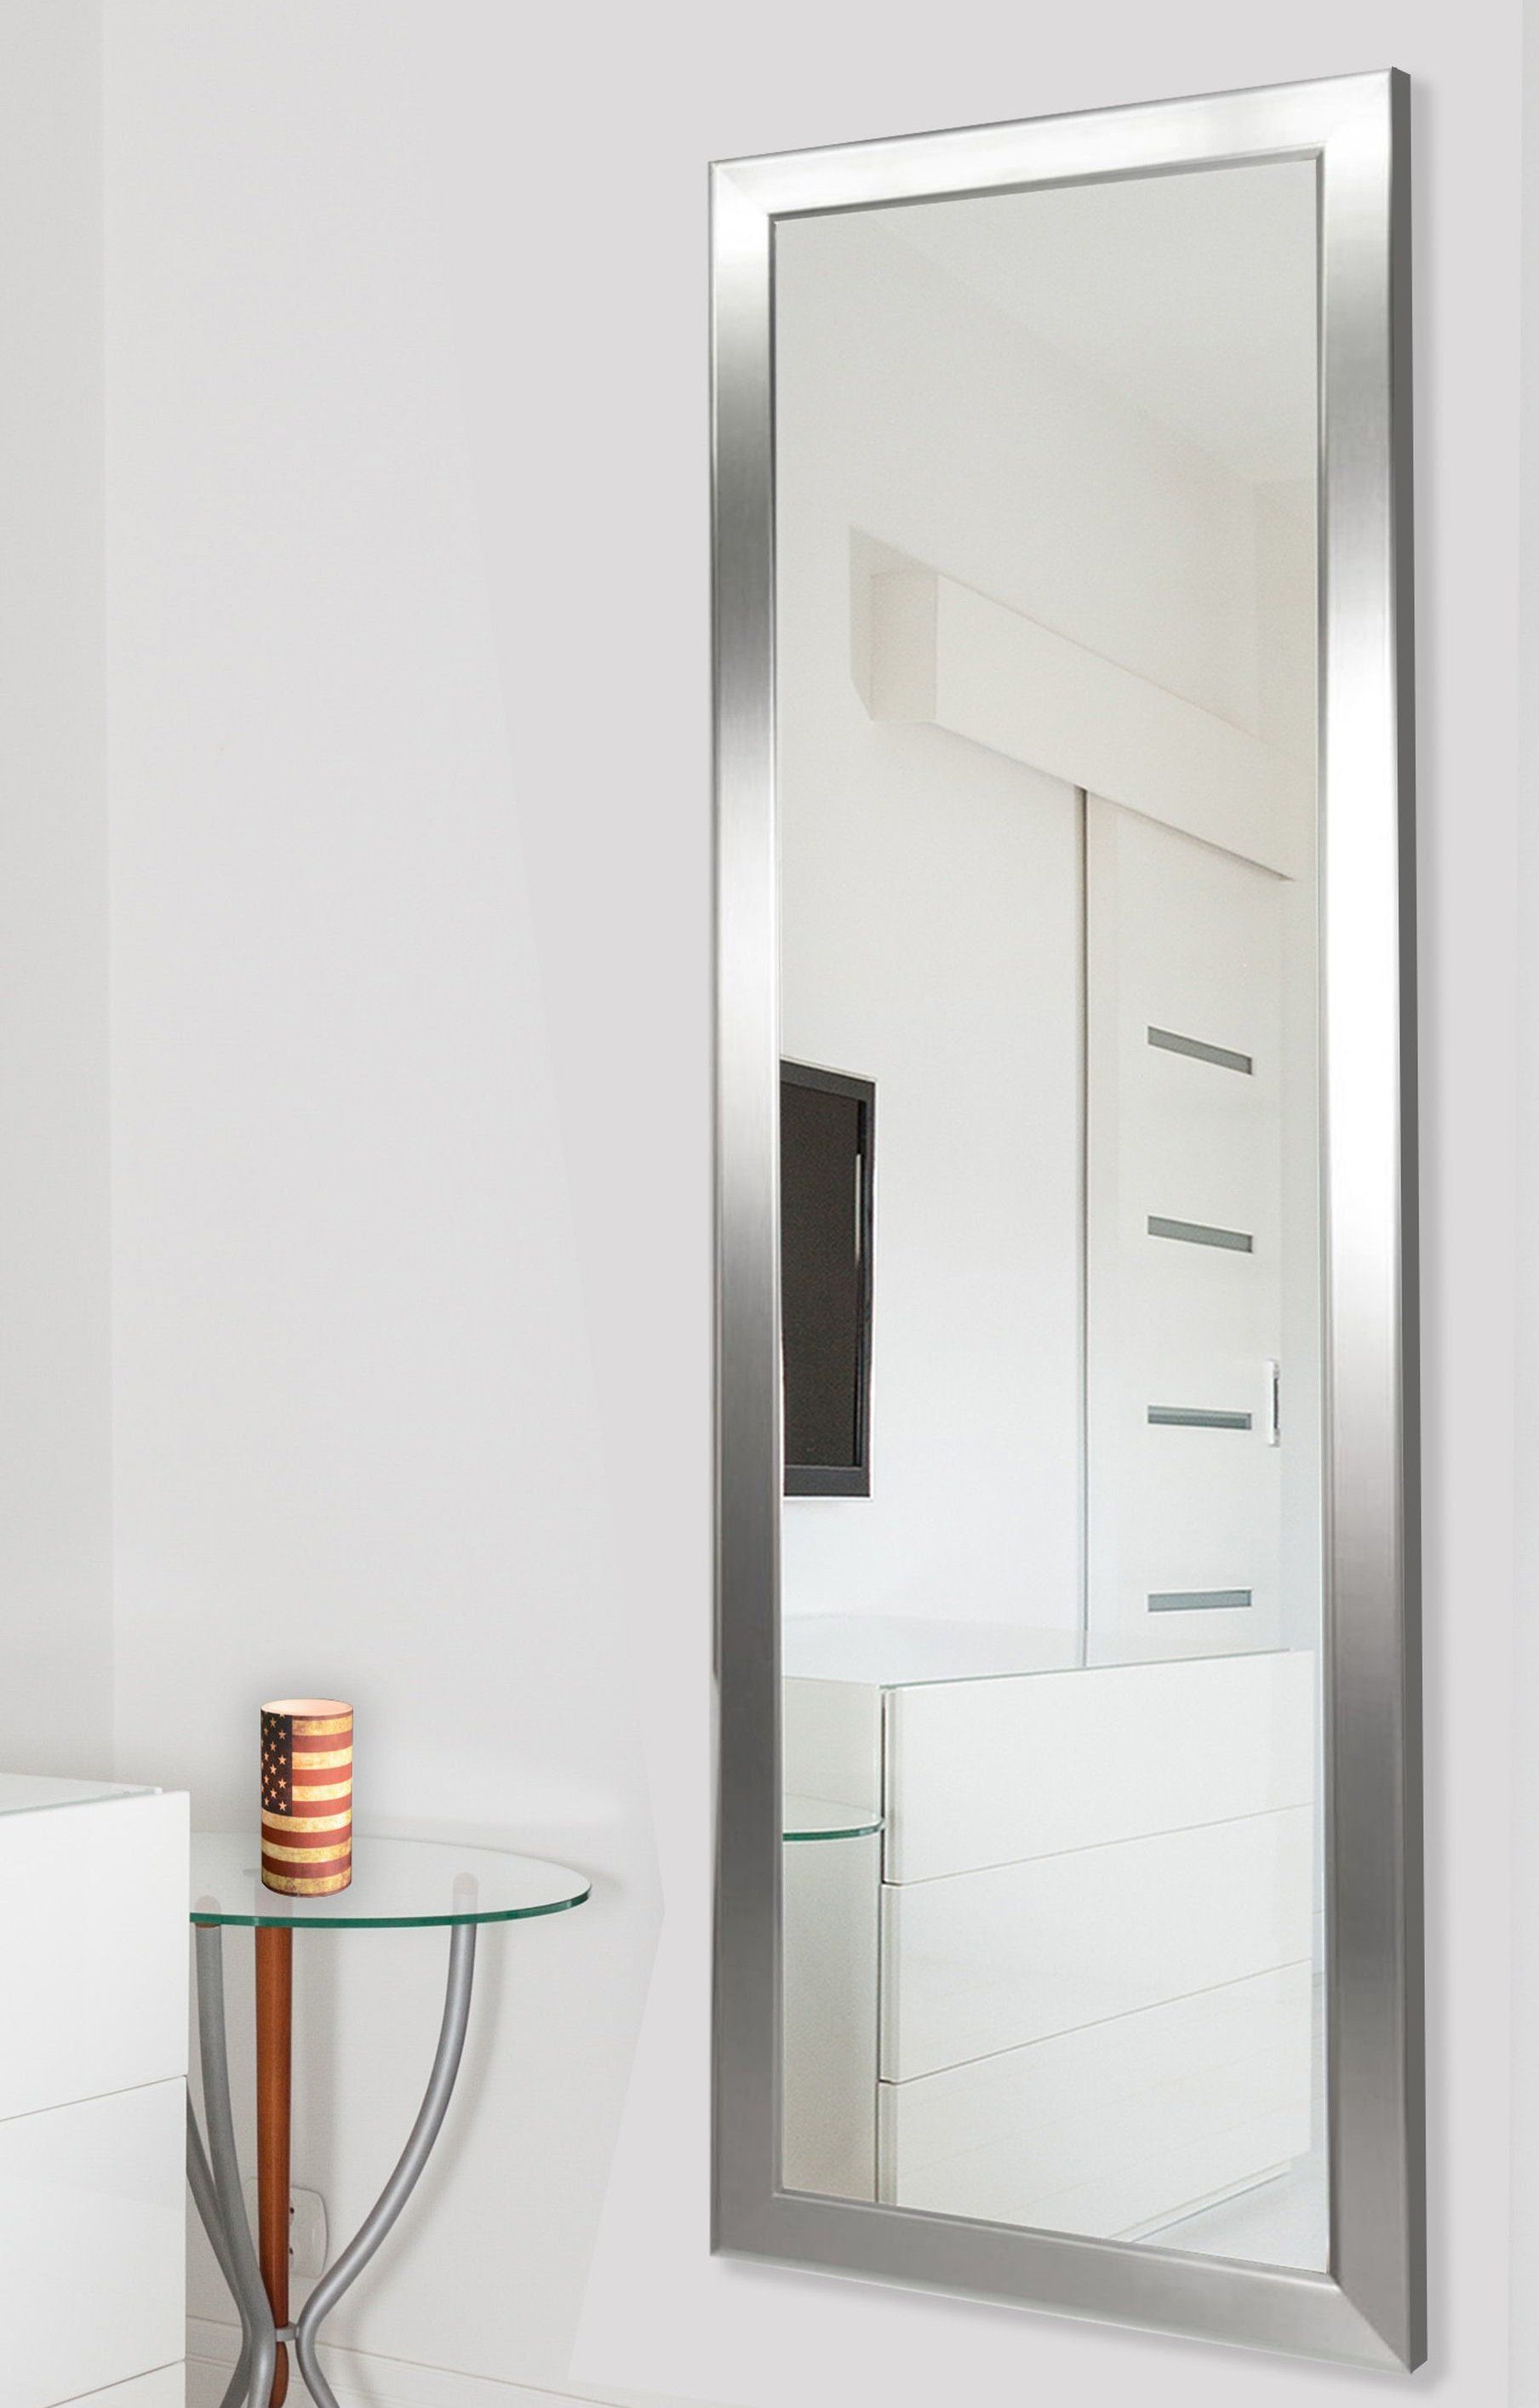 Edge Minimal Modern & Contemporary Full Length Body Mirror Intended For Modern & Contemporary Full Length Mirrors (View 13 of 20)